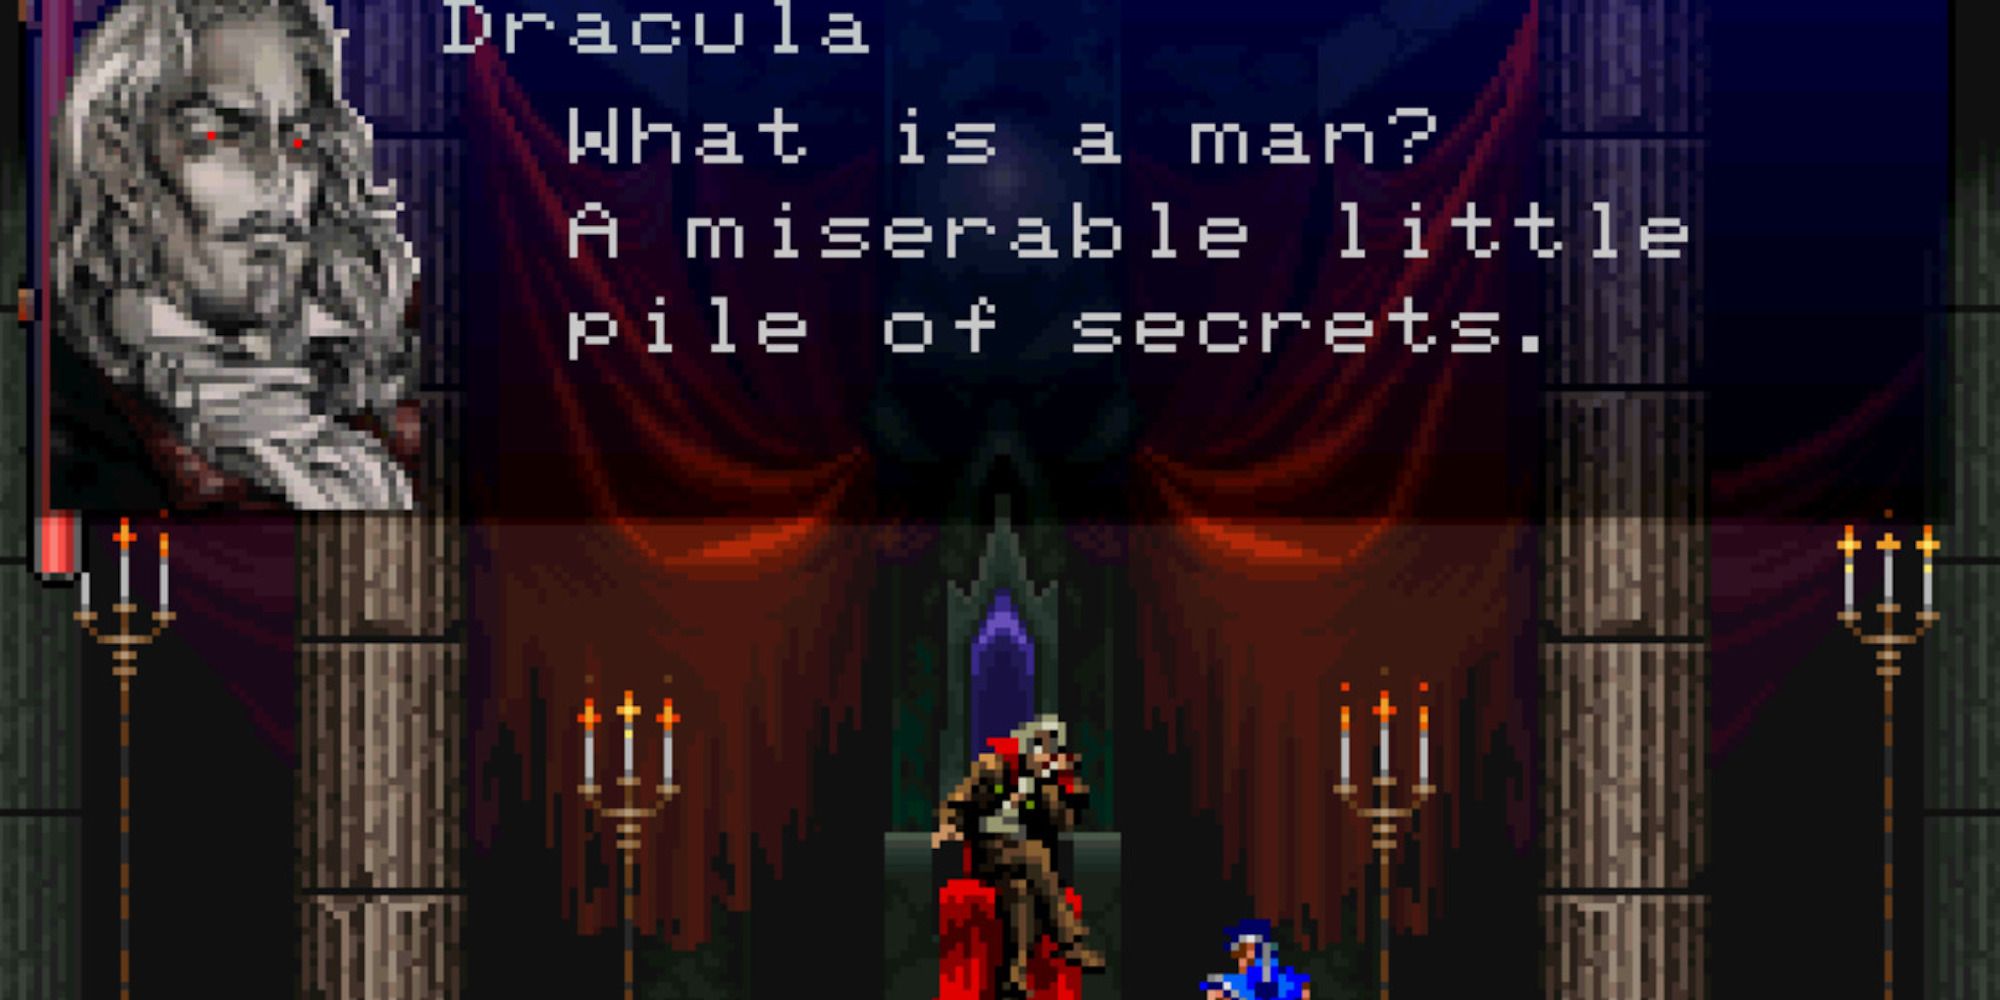 A scene featuring characters from Castlevania: Symphony of the Night